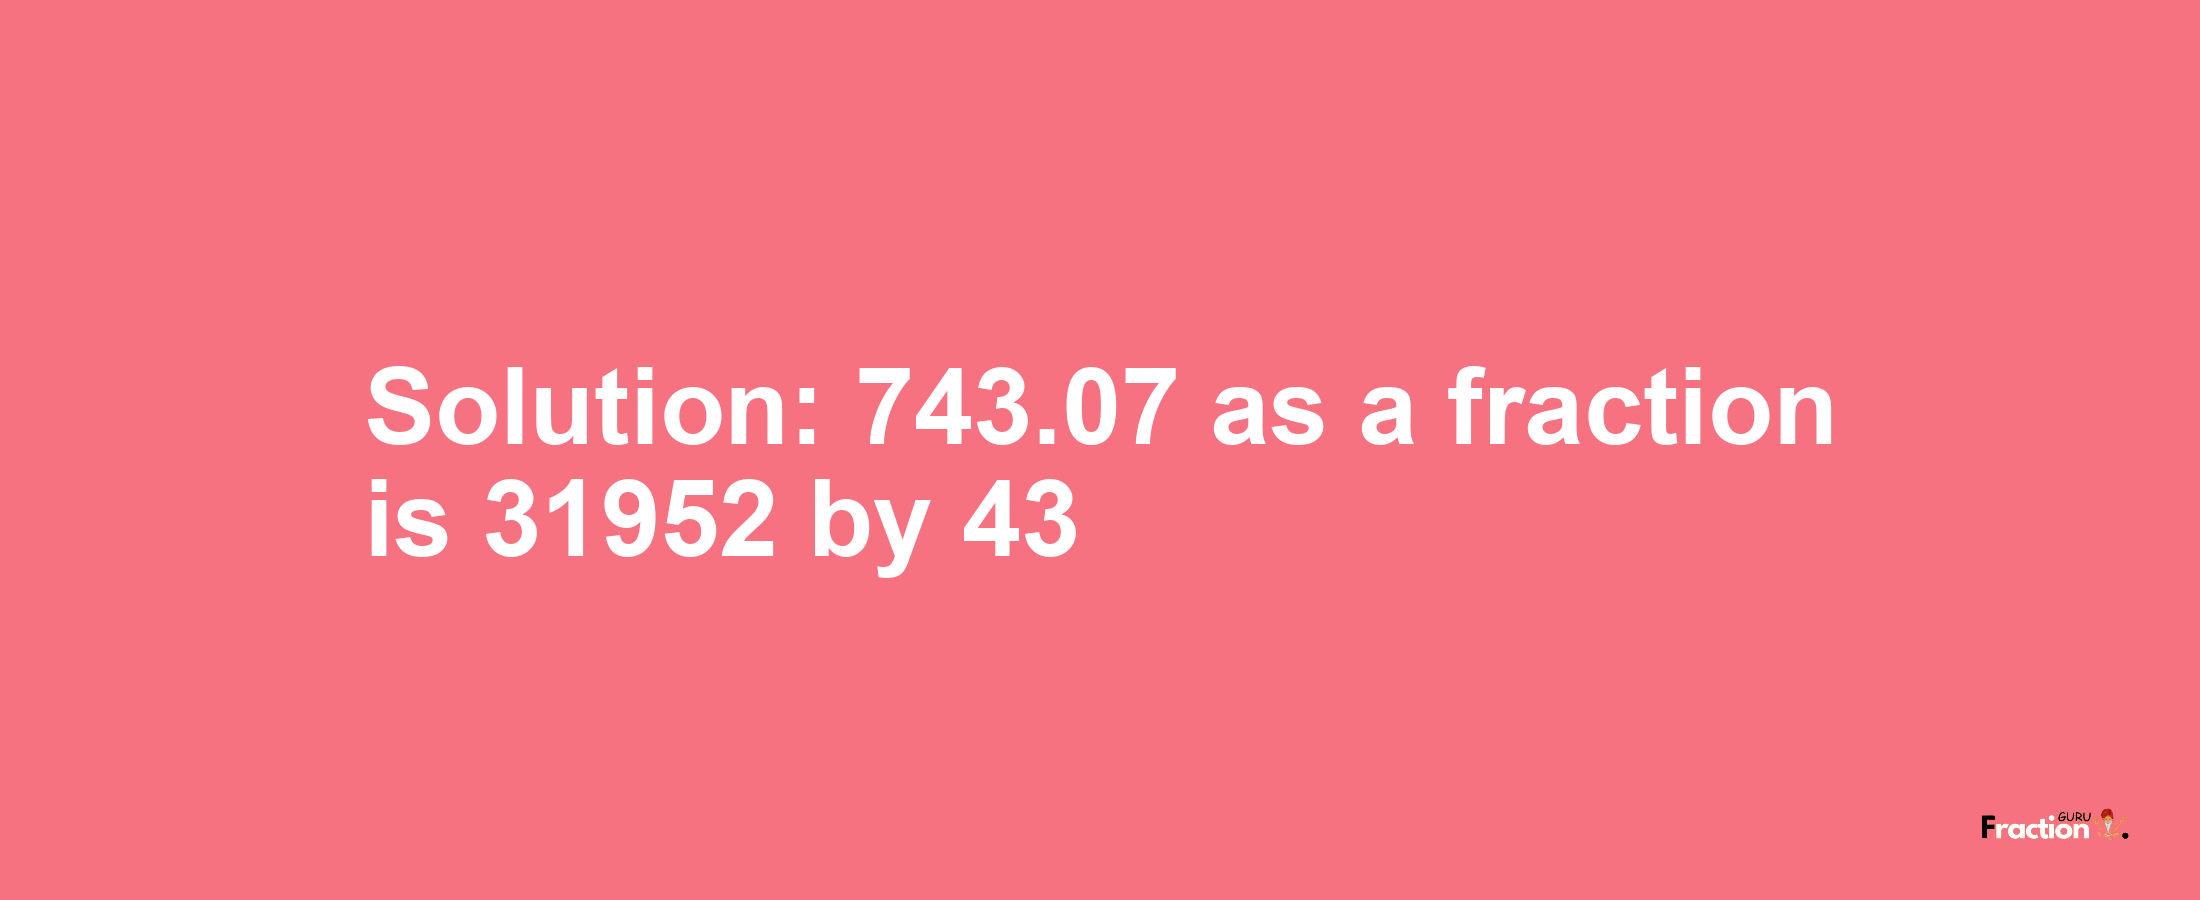 Solution:743.07 as a fraction is 31952/43